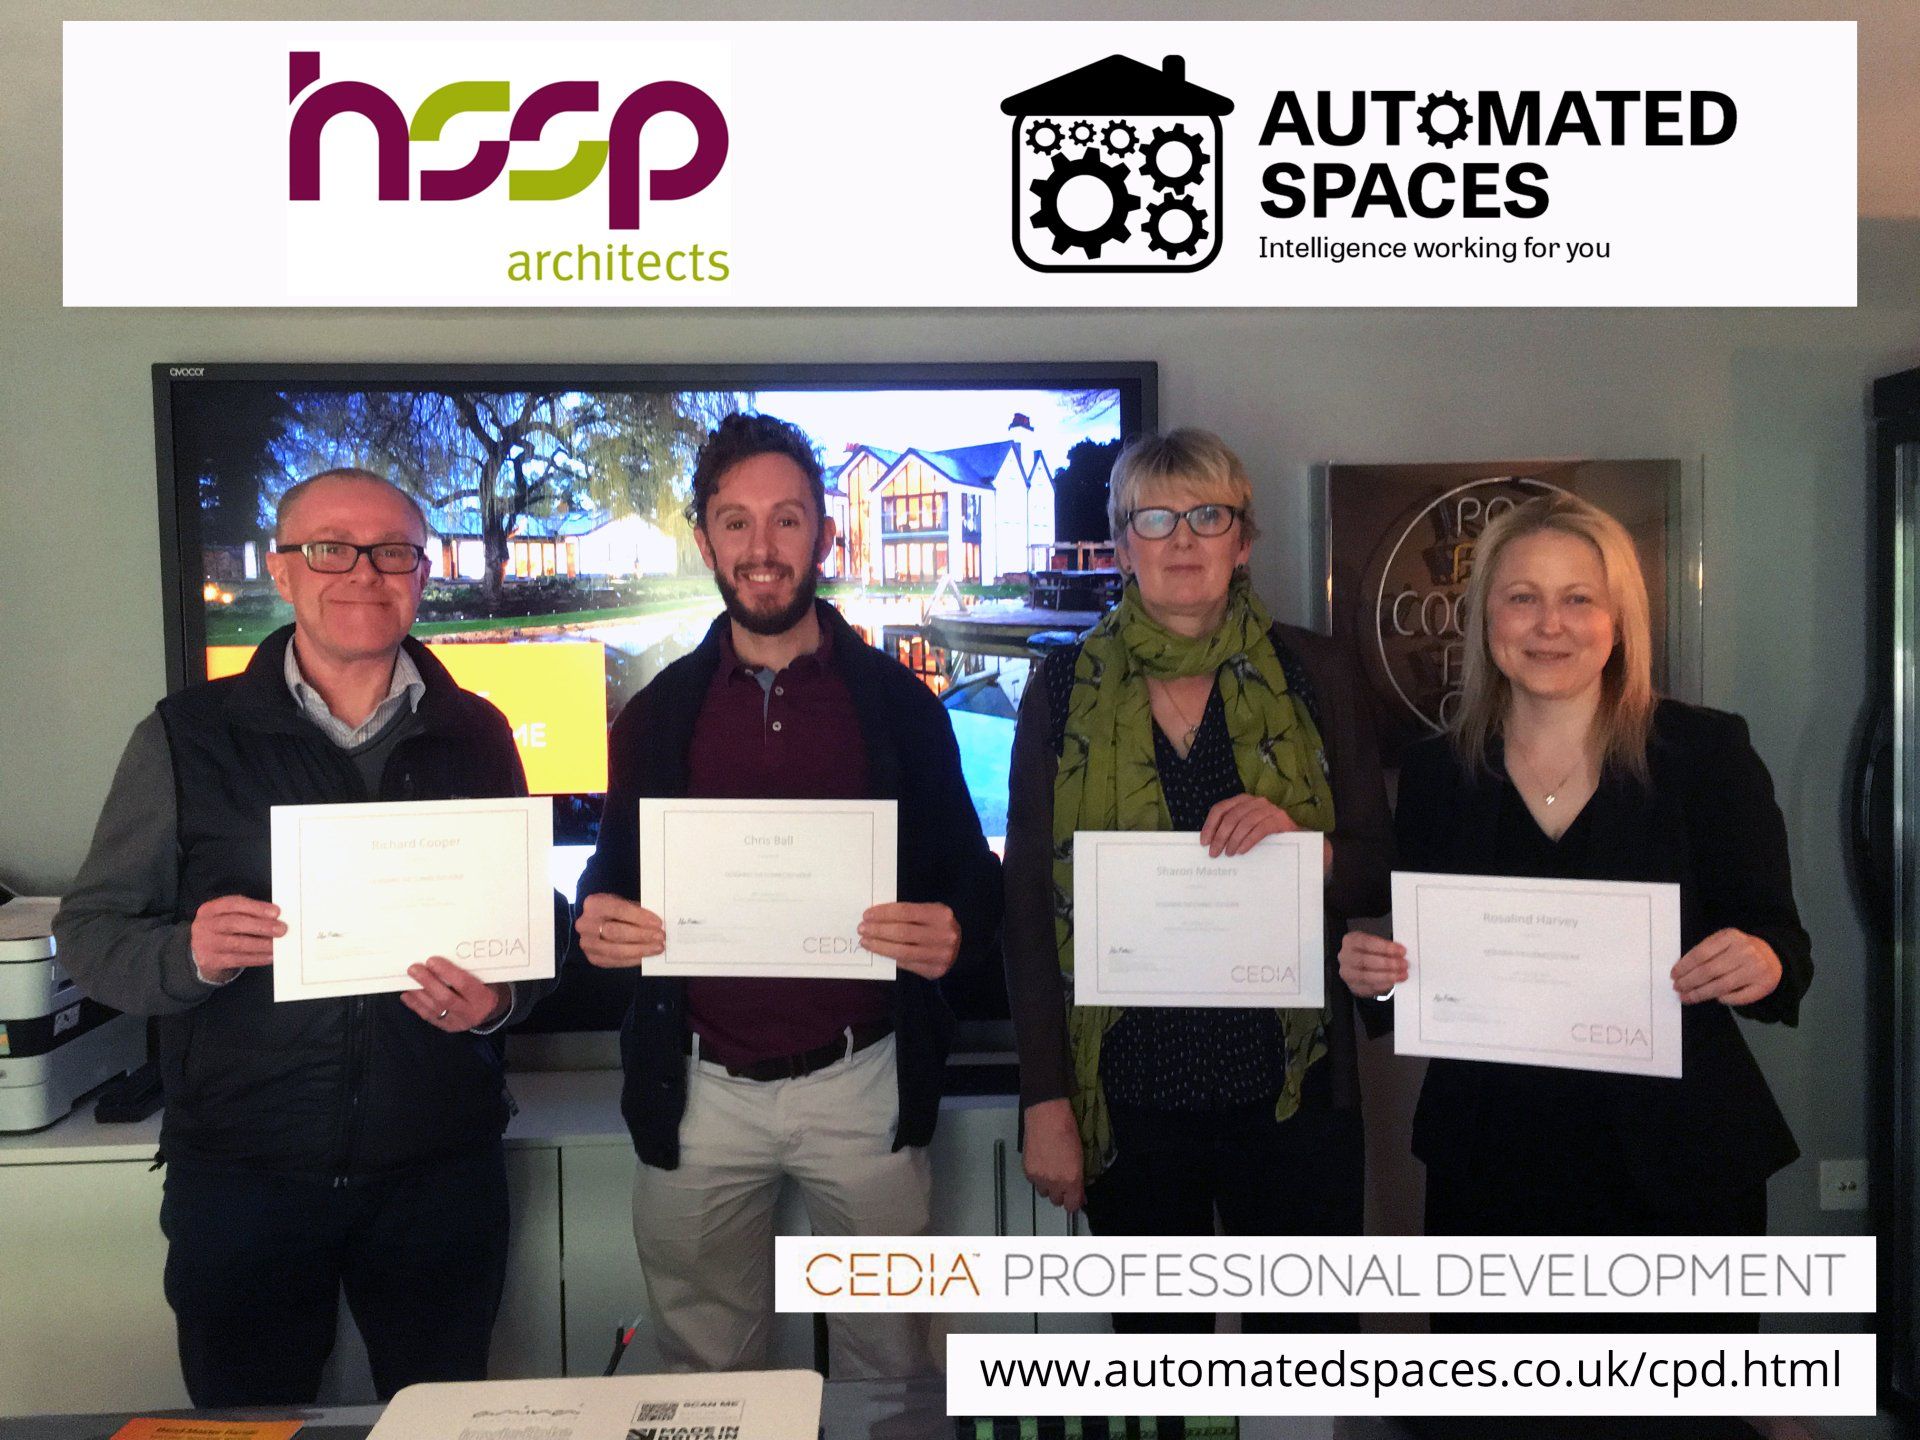 Photograph of HSSP Architects attending a CPD at Automated Spaces